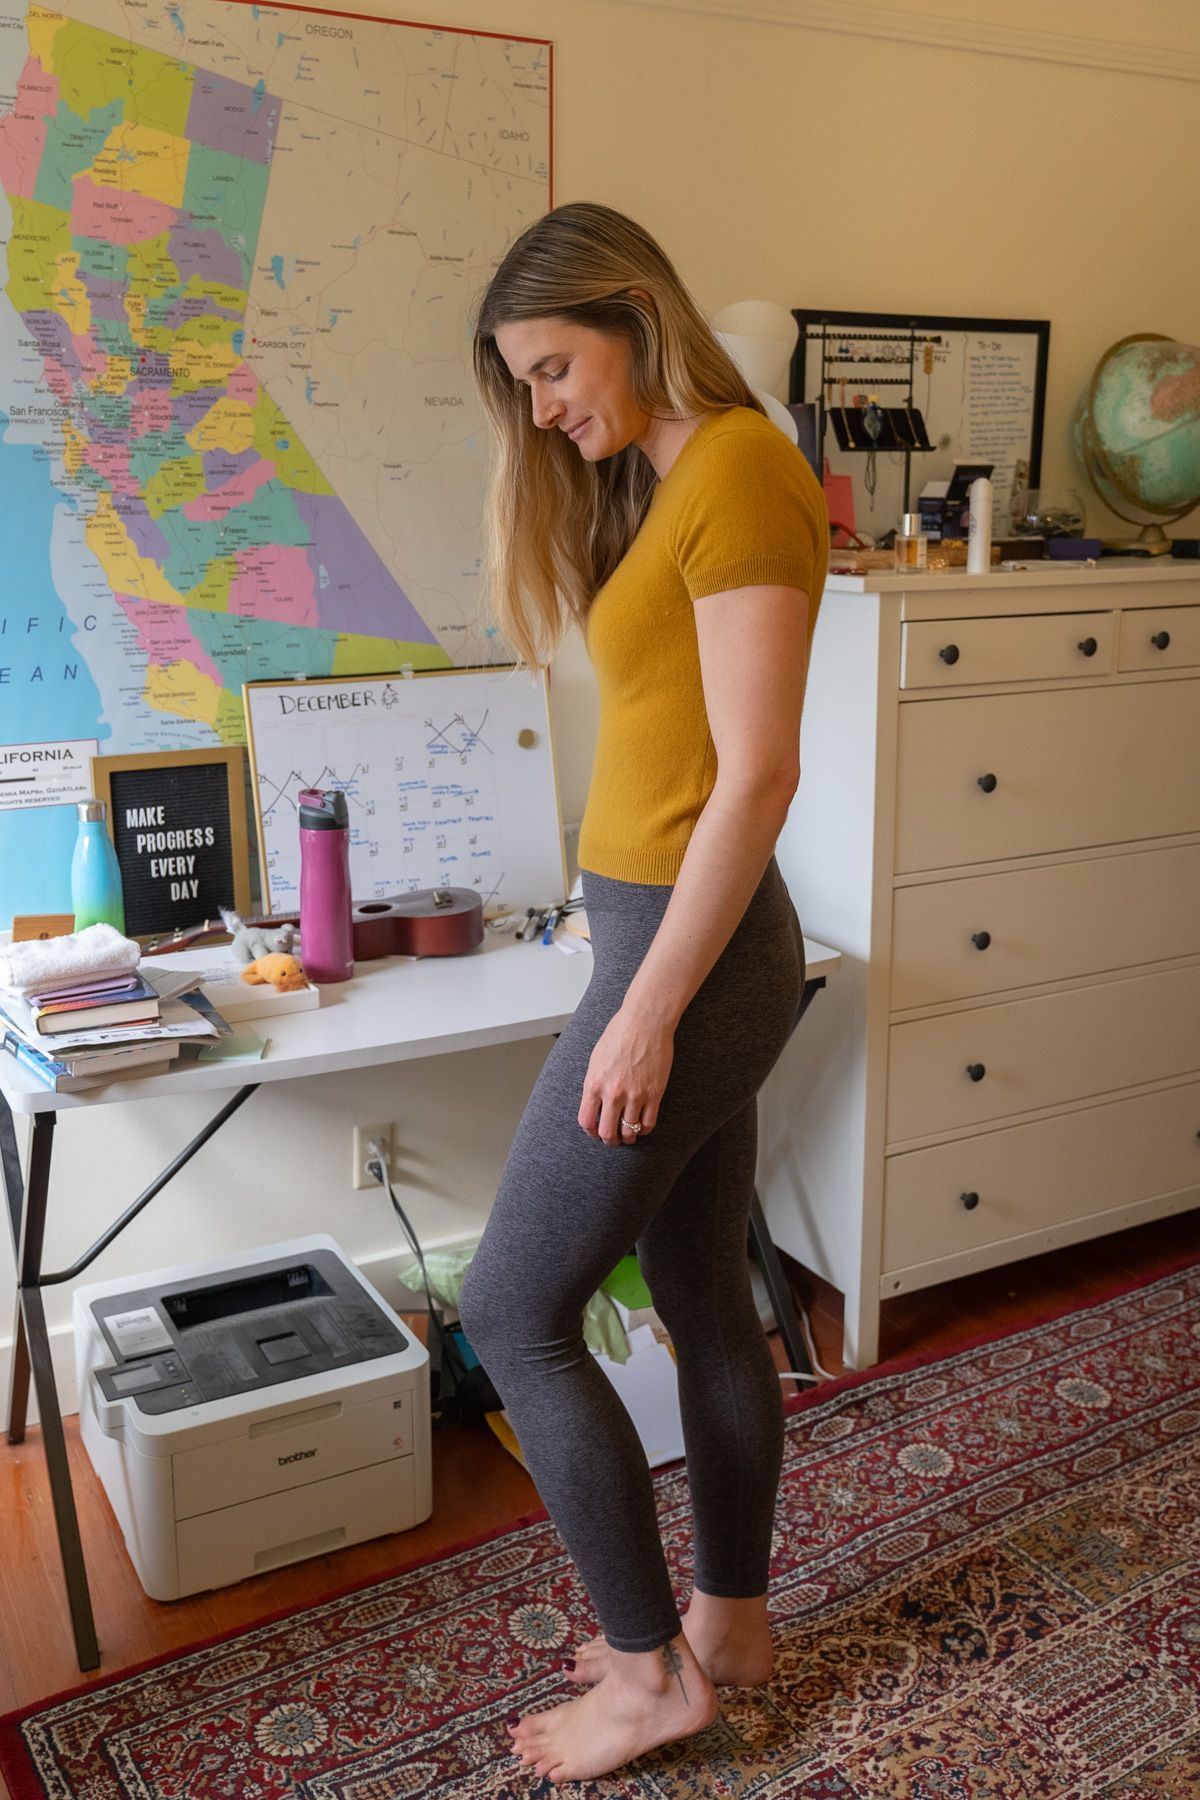 A young woman wearing grey Ultra-Soft High-Rise Leggings and a yellow shirt stands to the side, looking down in an interior setting with a map of California on the wall behind her.